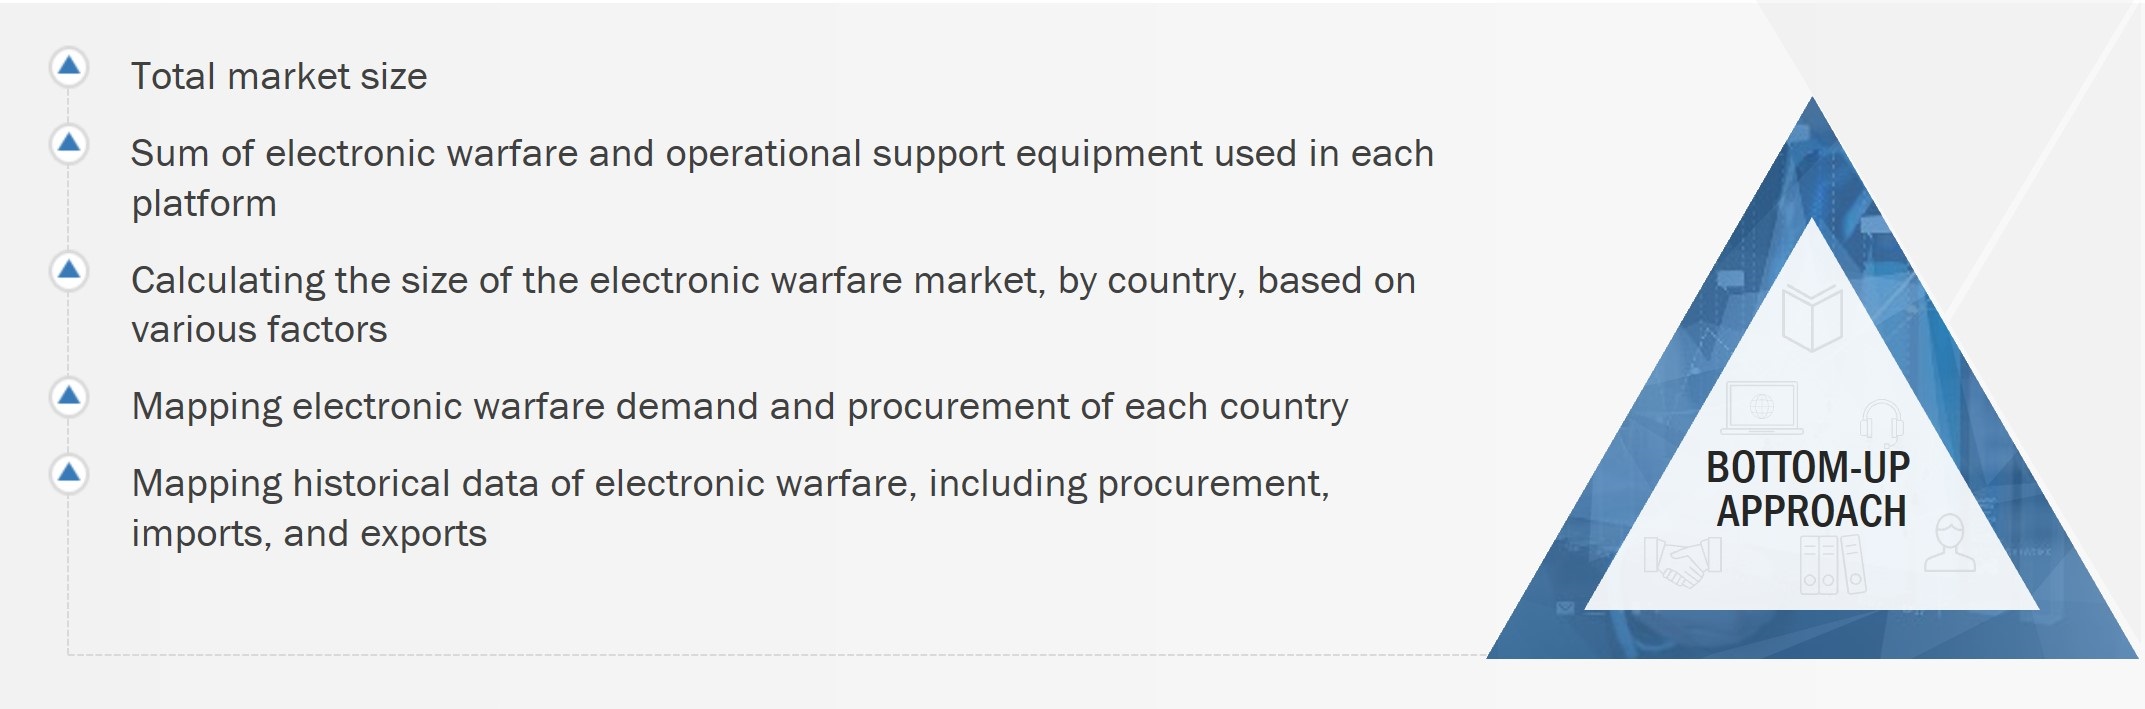 Electronic Warfare Market Size, and Bottom-Up Approach 